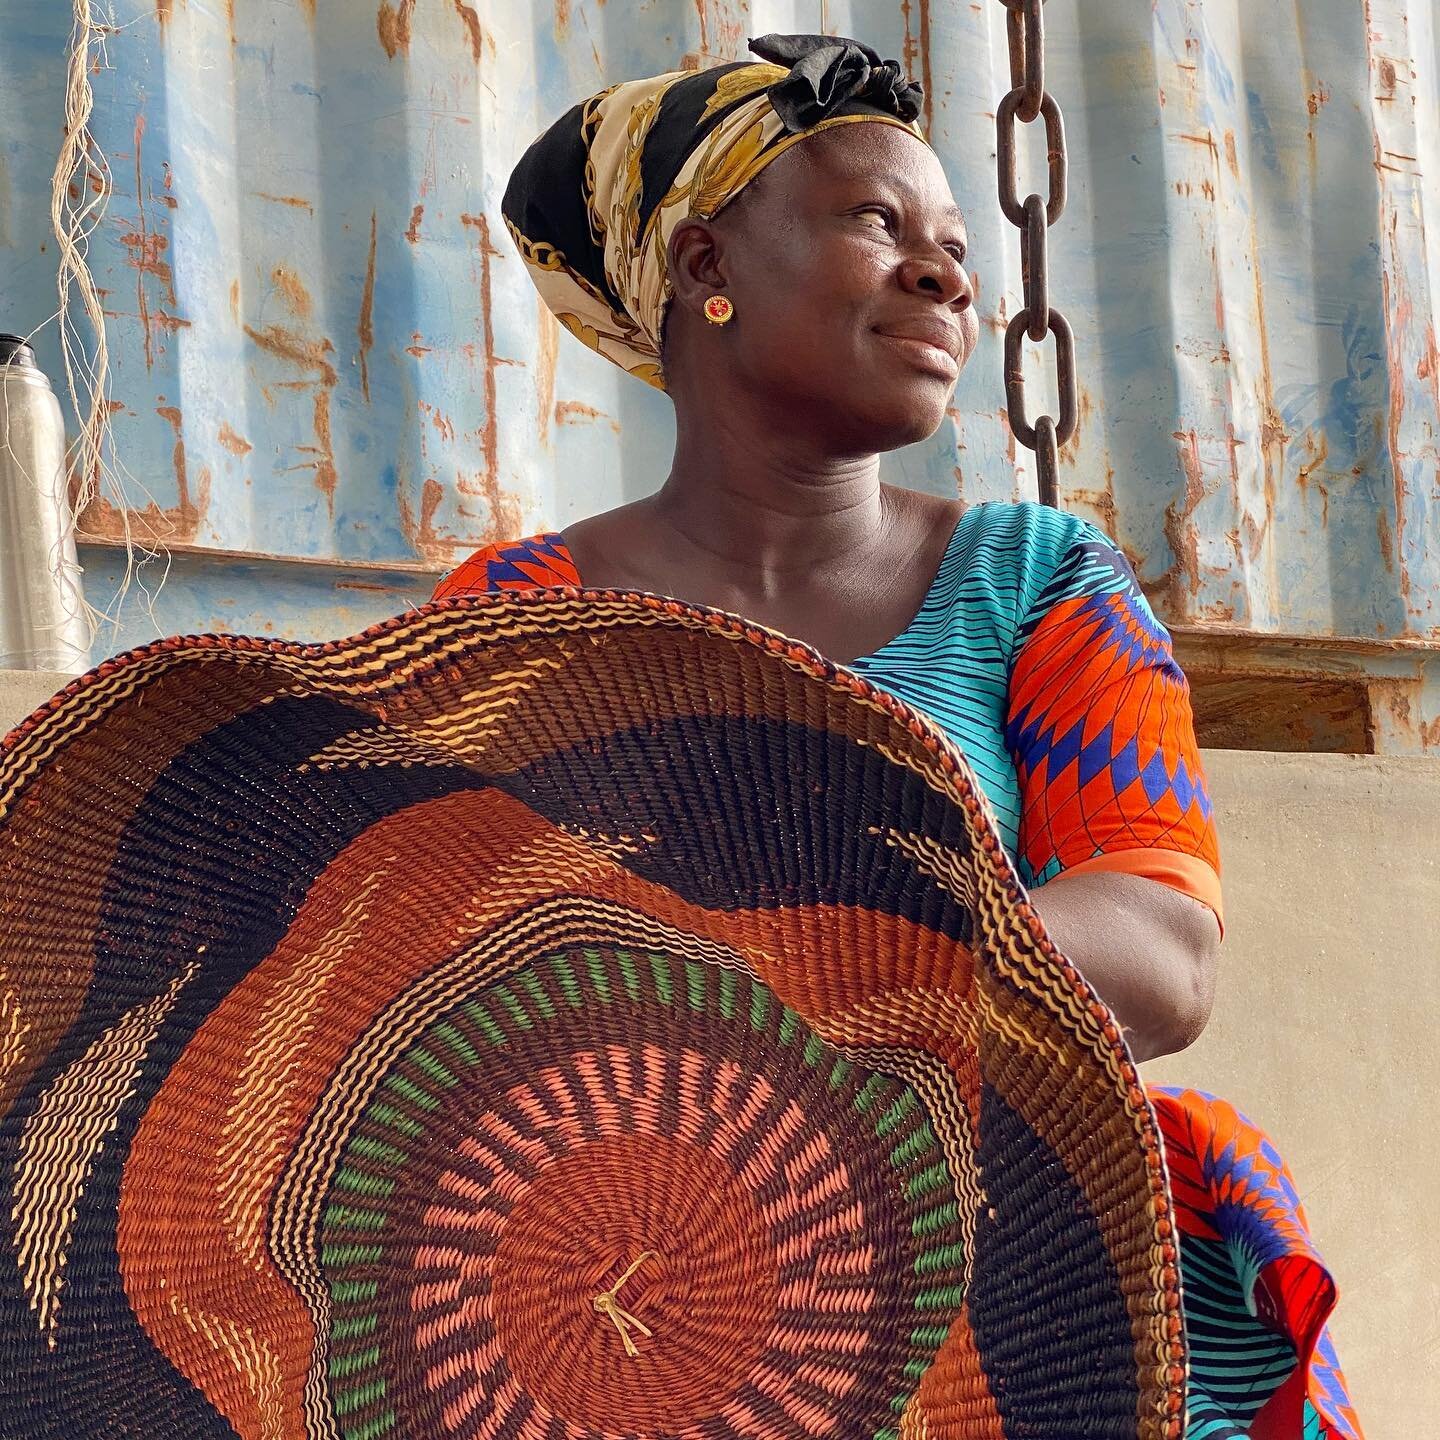 S L O W&nbsp; made wonder of the world... 😍 Baba Tree Basket Co. have been preserving the basket-weaving culture of the Gurunsi people in Bolgatanga in Ghana for over 15 years. They work closely with over 250 artisans, each trained by elders with sk